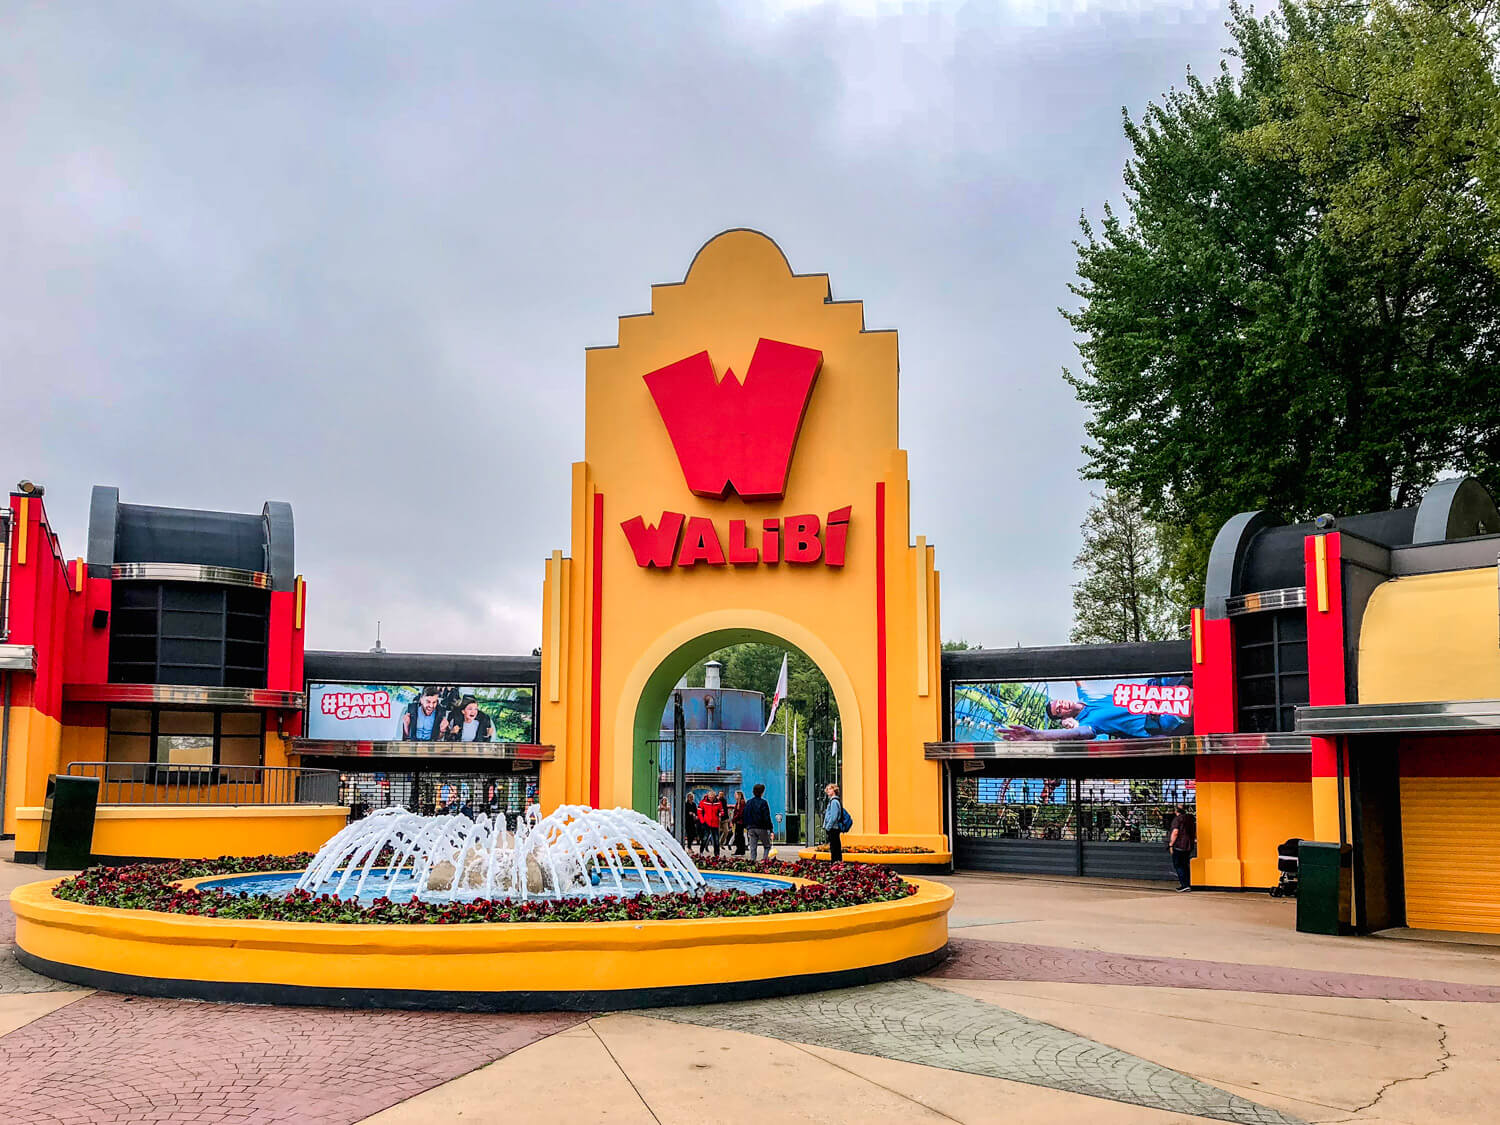 walibi holland entree main street pays bas parc attractions